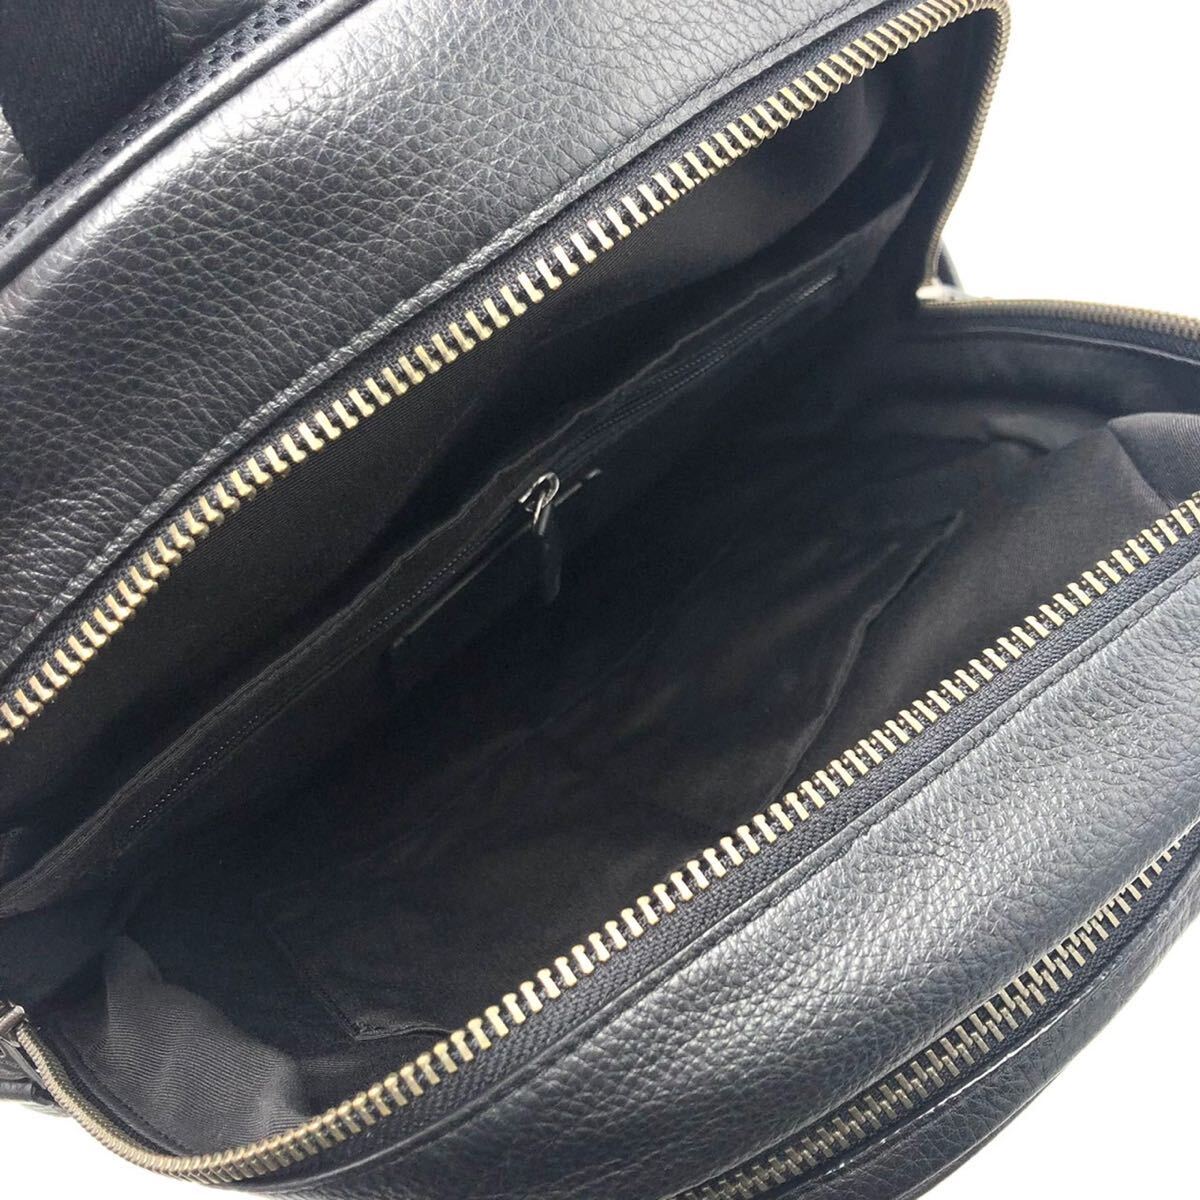  as good as new present close year of model *COACH rucksack backpack Coach bag leather men's business ton pson signature black 